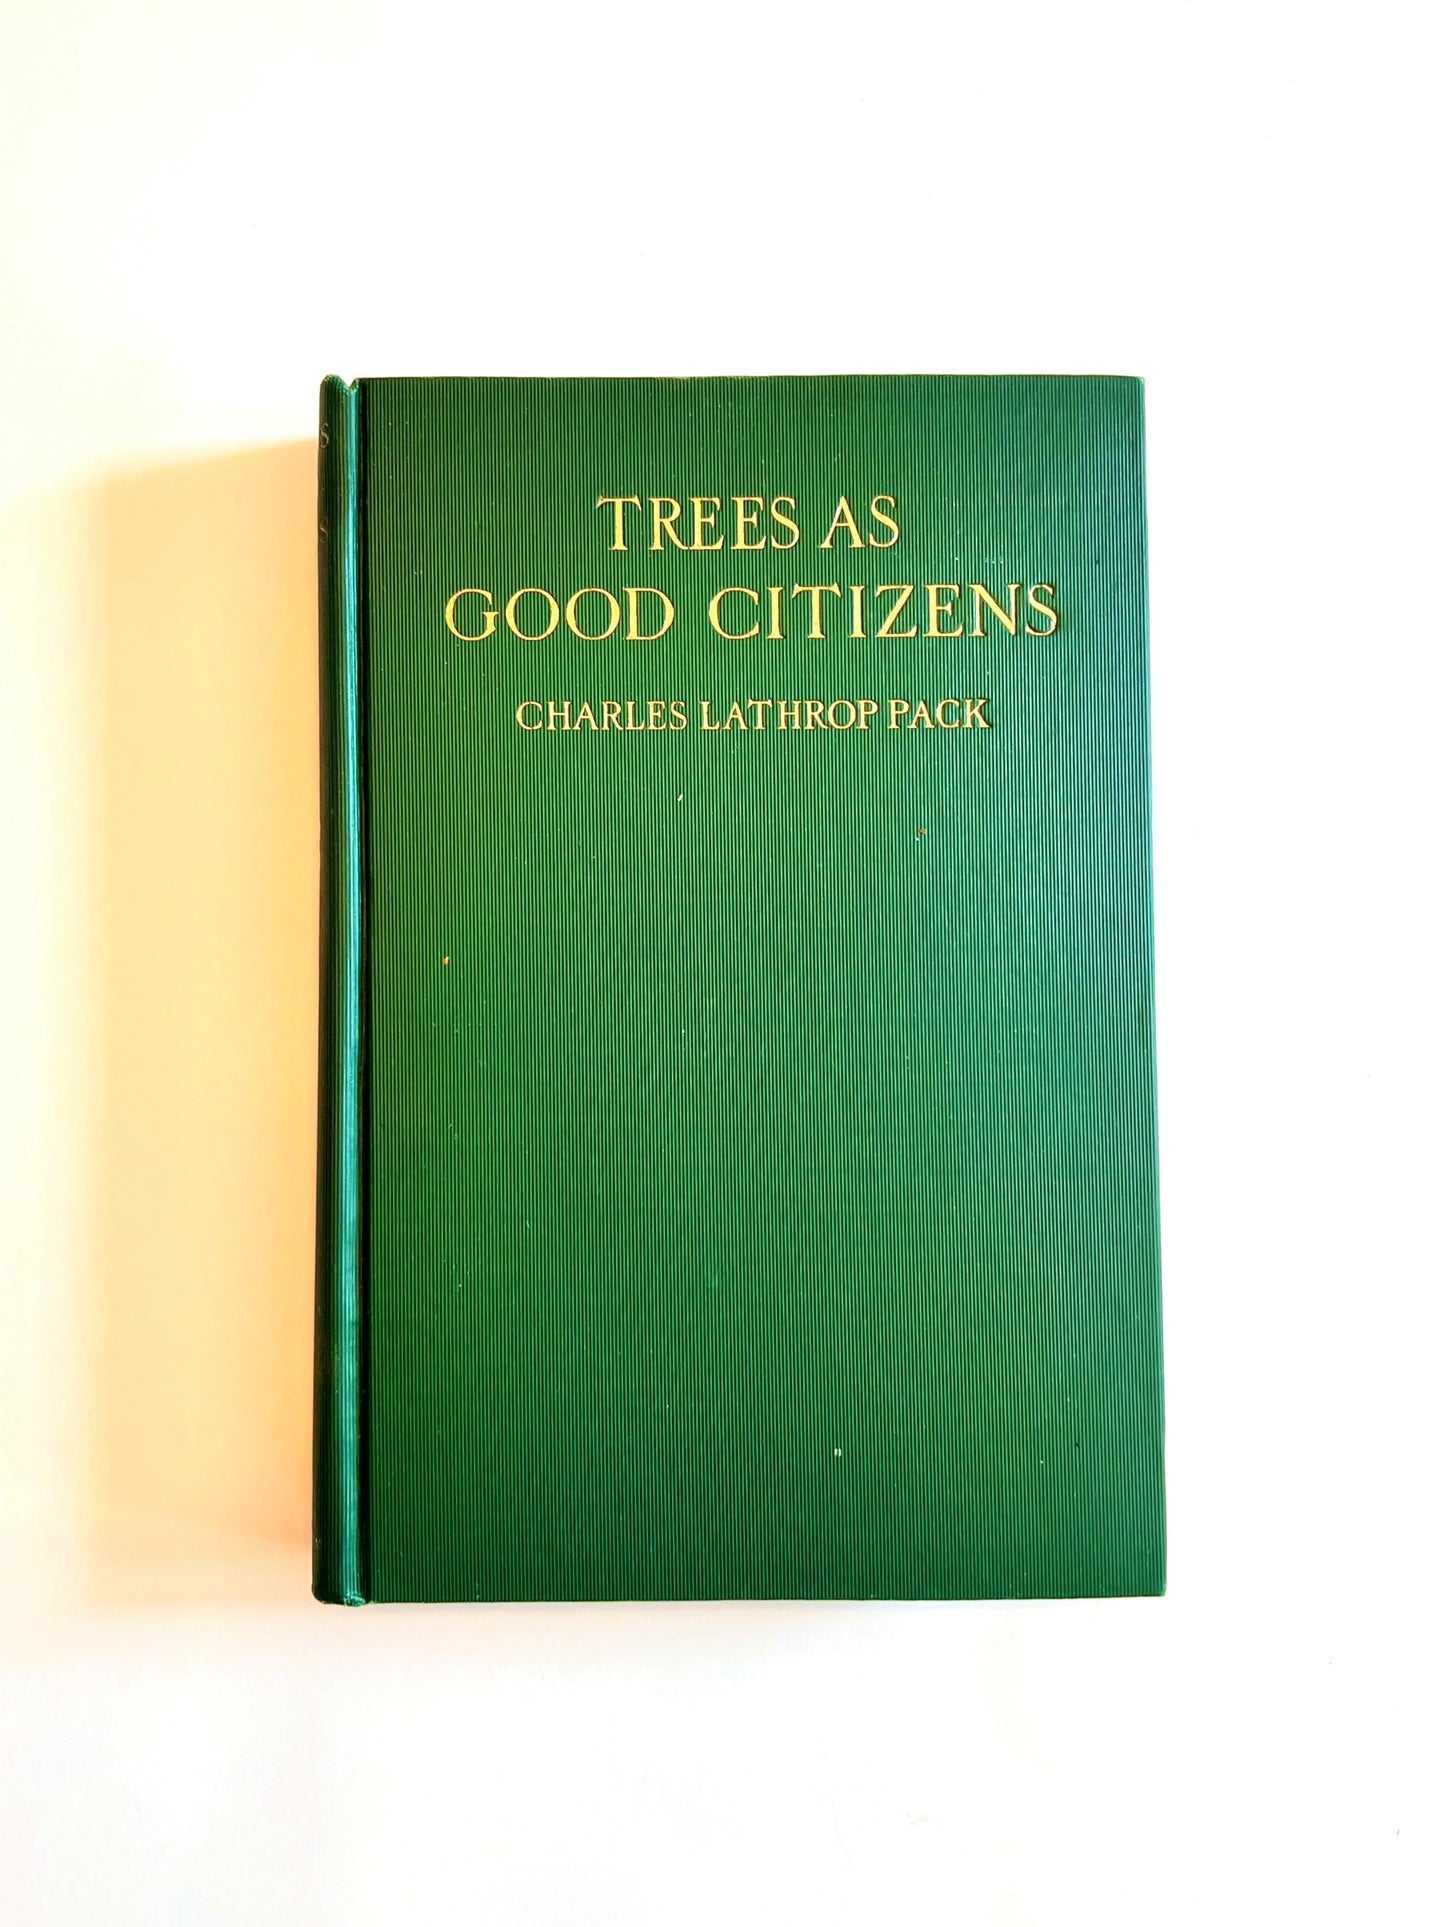 Trees as Good Citizens by Charles Lathrop Pack, 1923